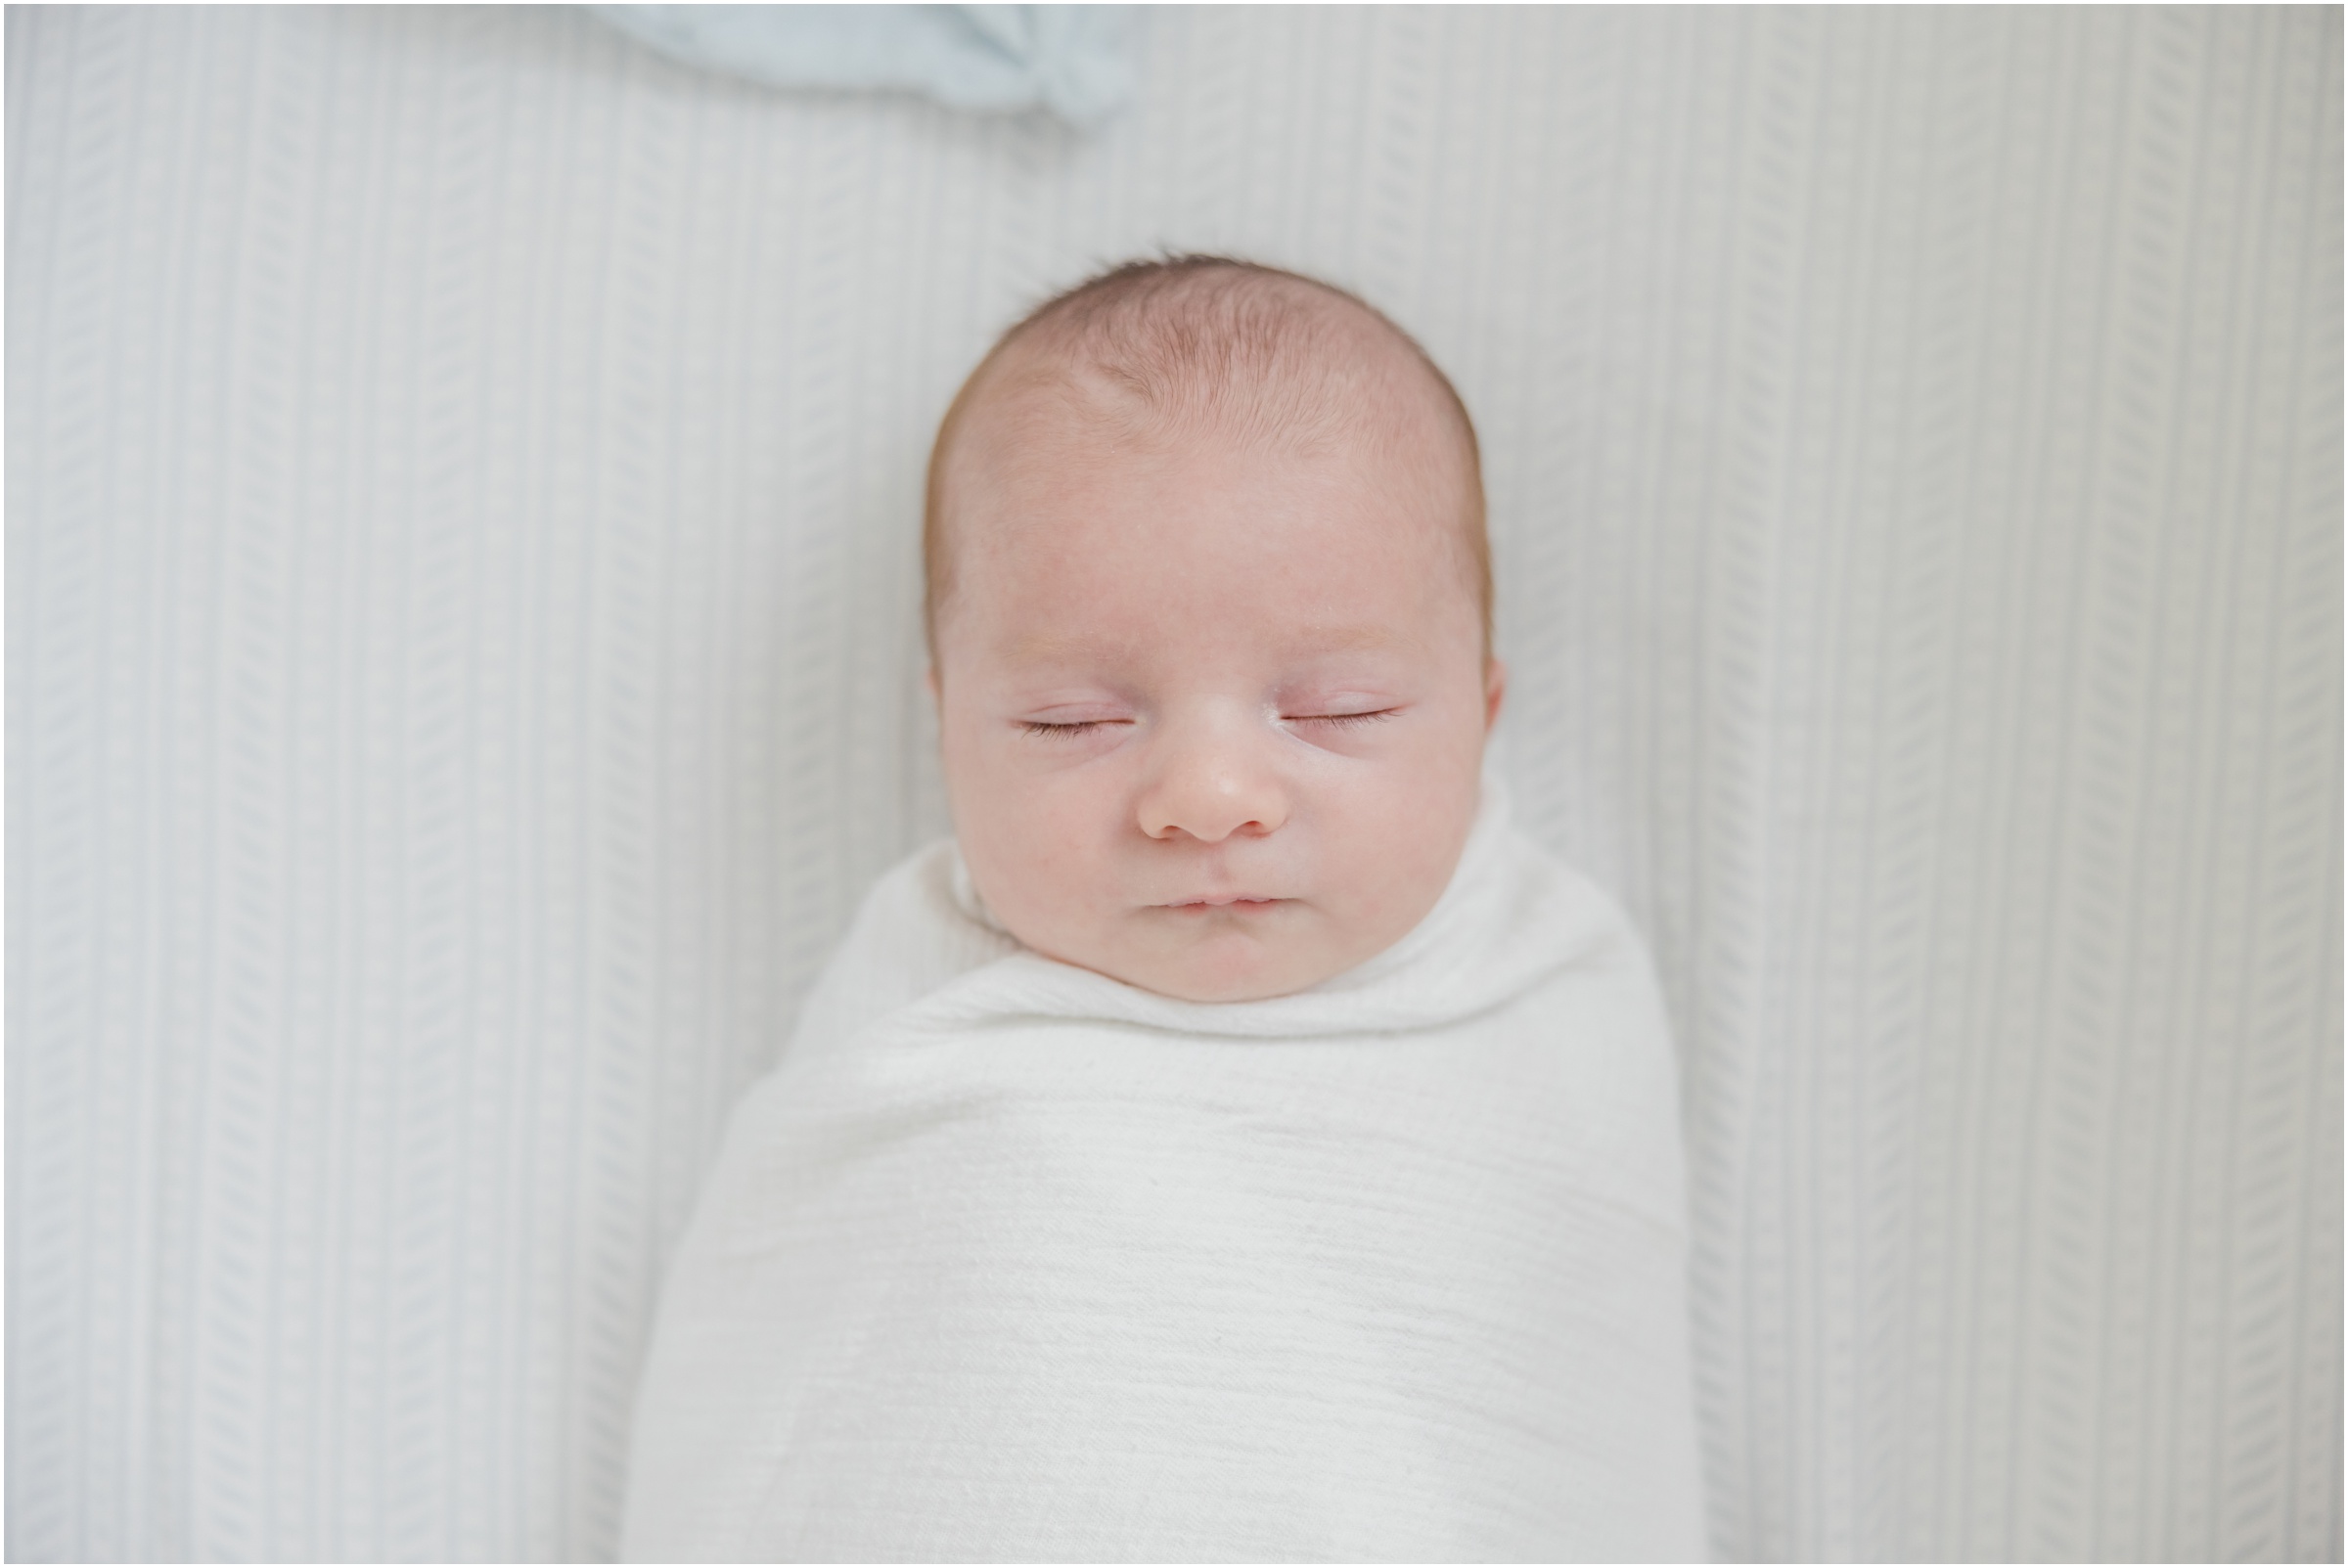 Portrait of a newborn baby boy swaddled in a white blanket laying on a soft blue patterned crib sheet.